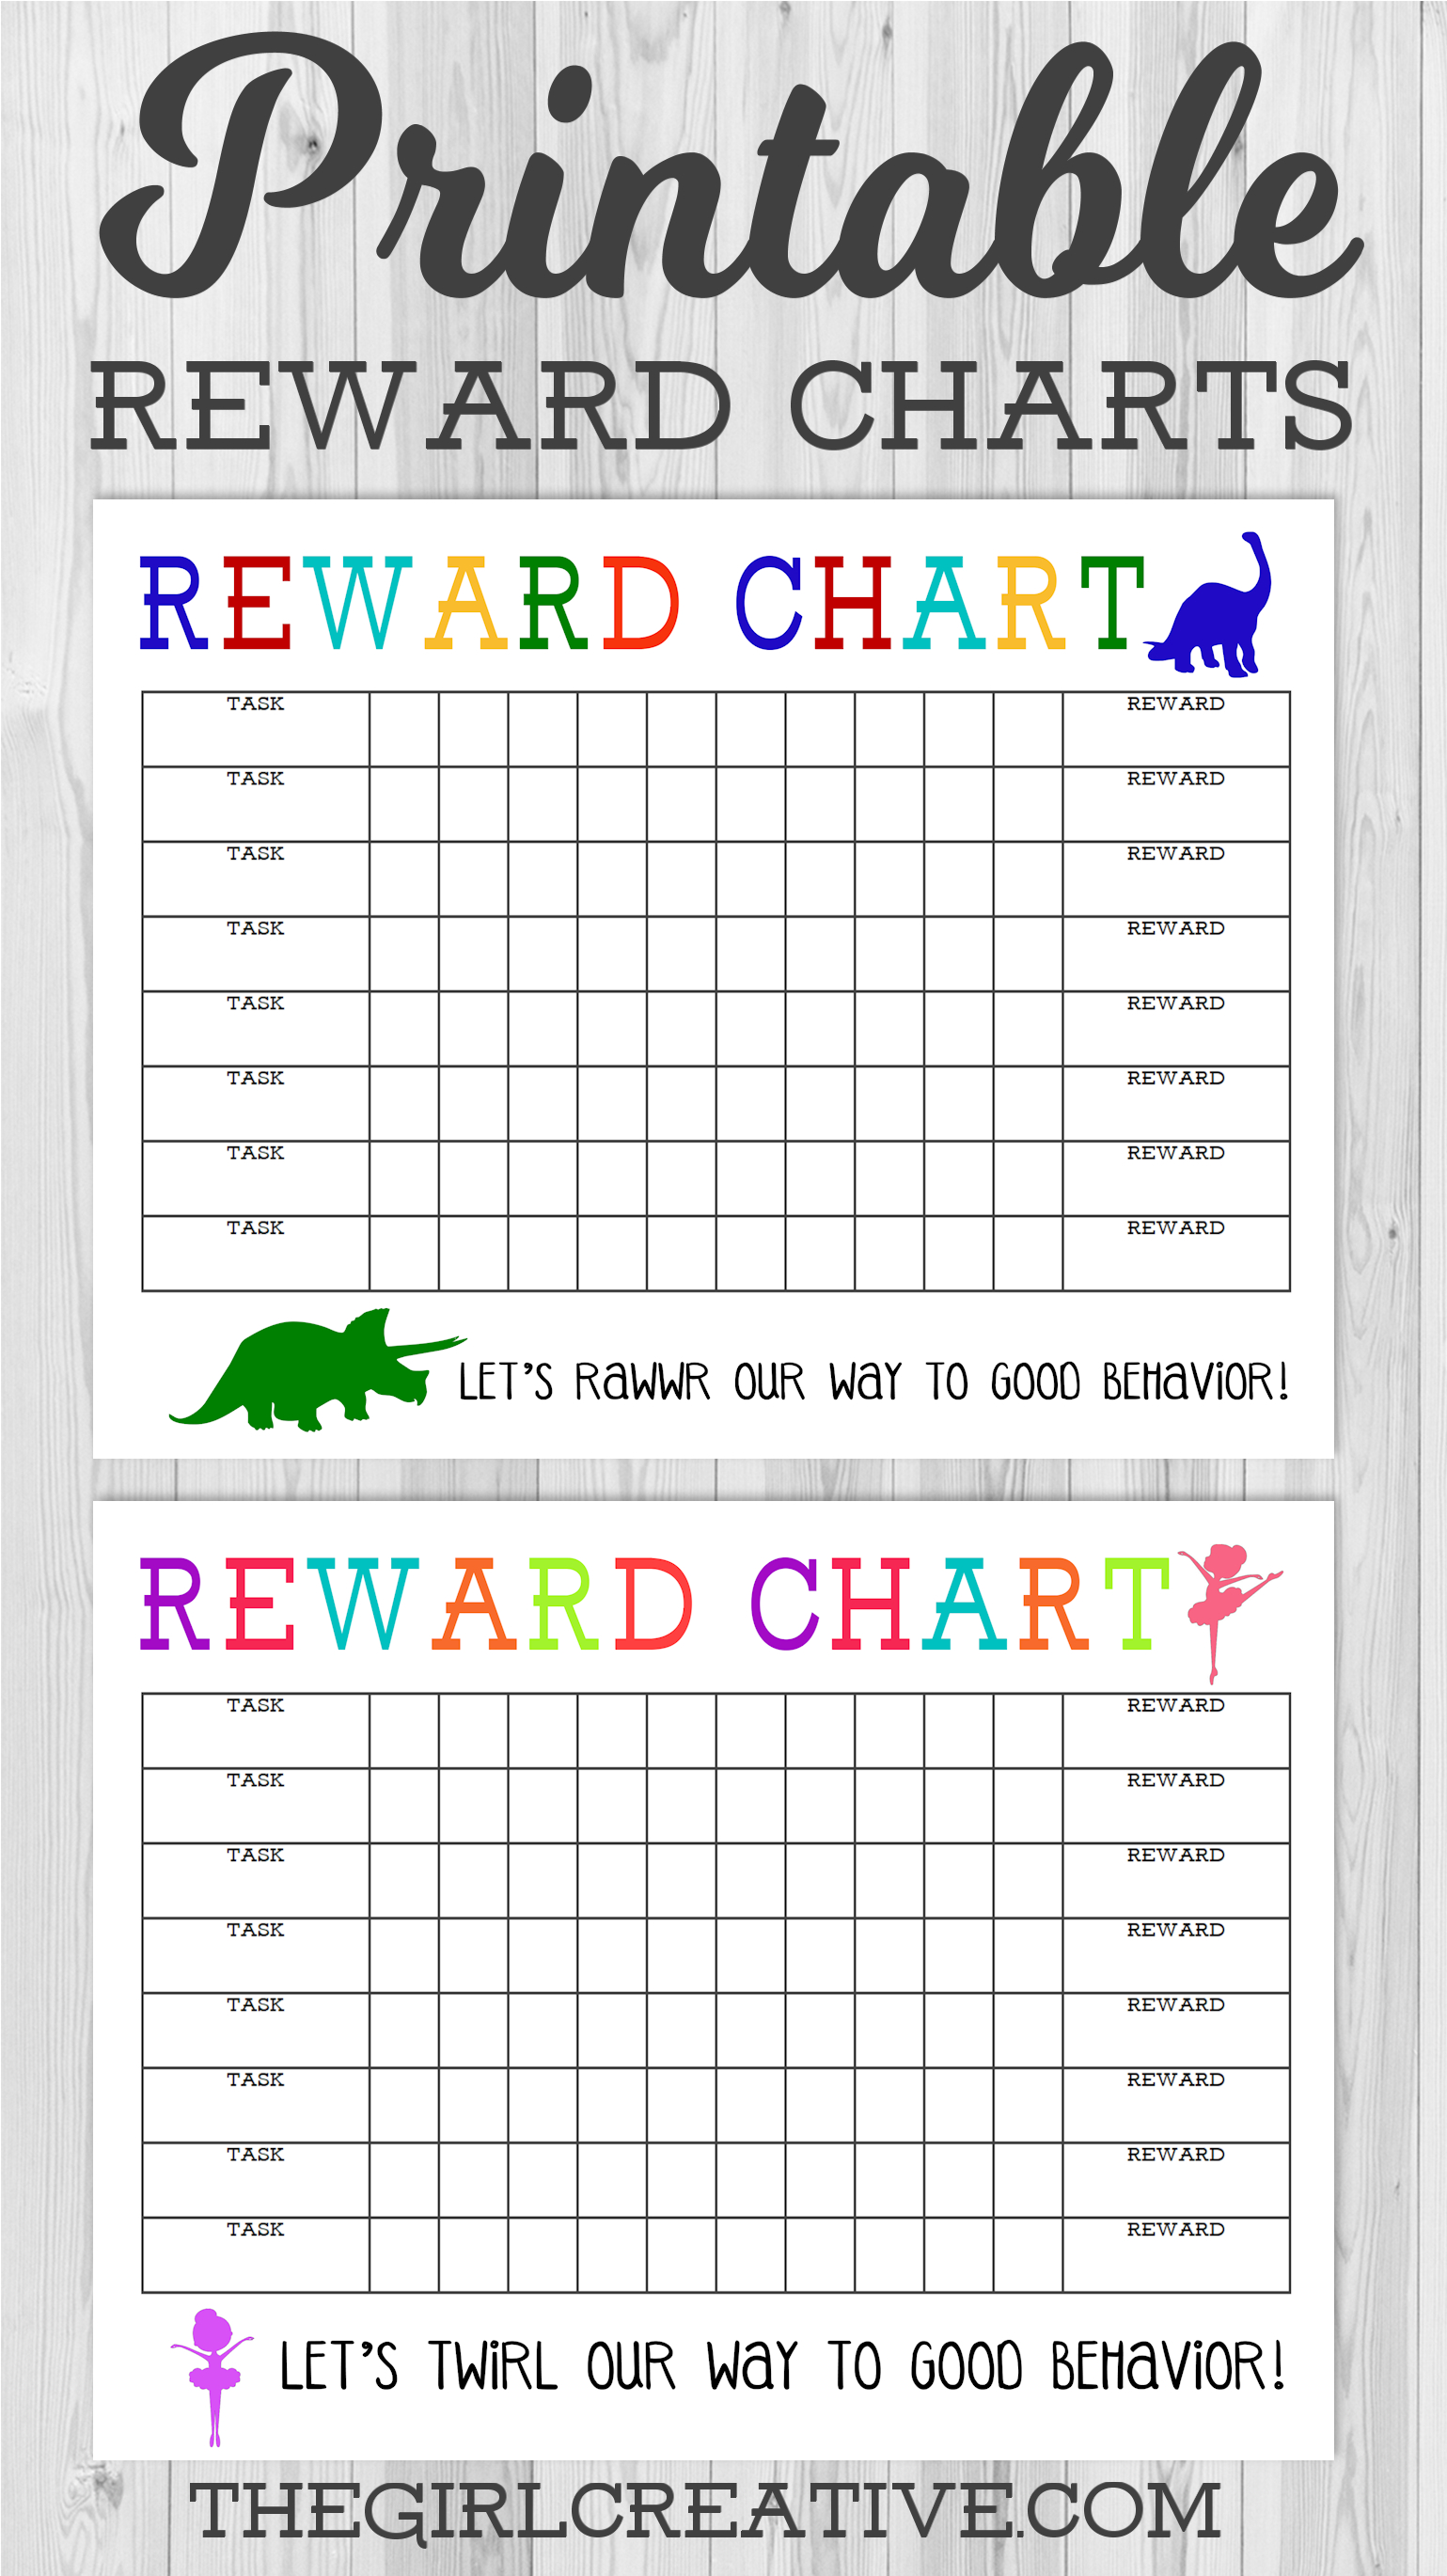 Printable Reward Chart | Share Today&amp;#039;s Craft And Diy Ideas - Free Printable Incentive Charts For Students